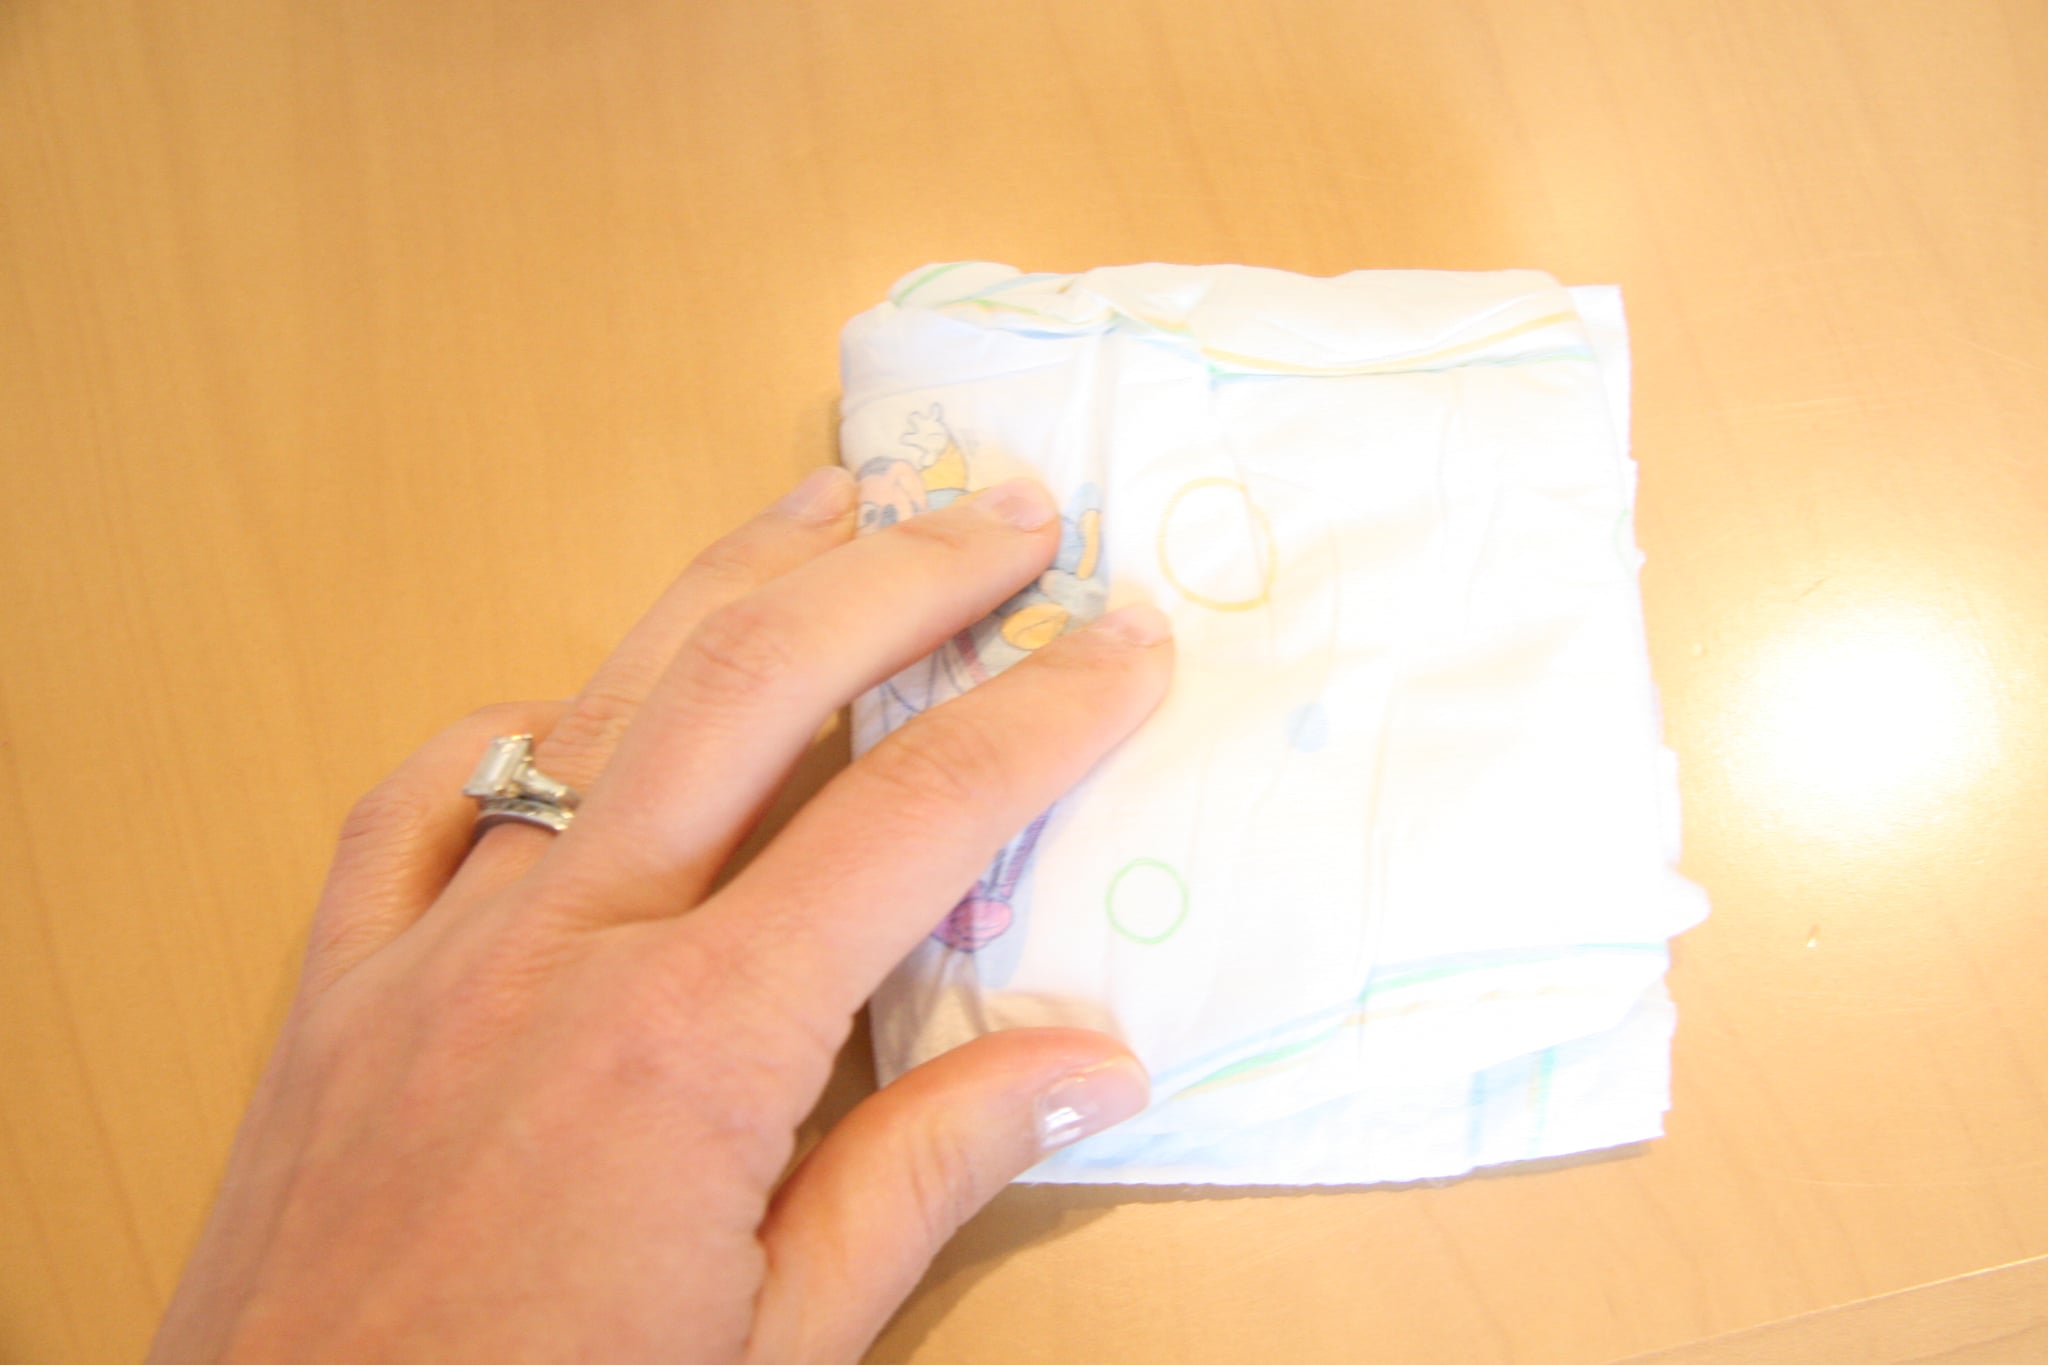 Next, fold the diapers and start placing them inside the looped ribbon.